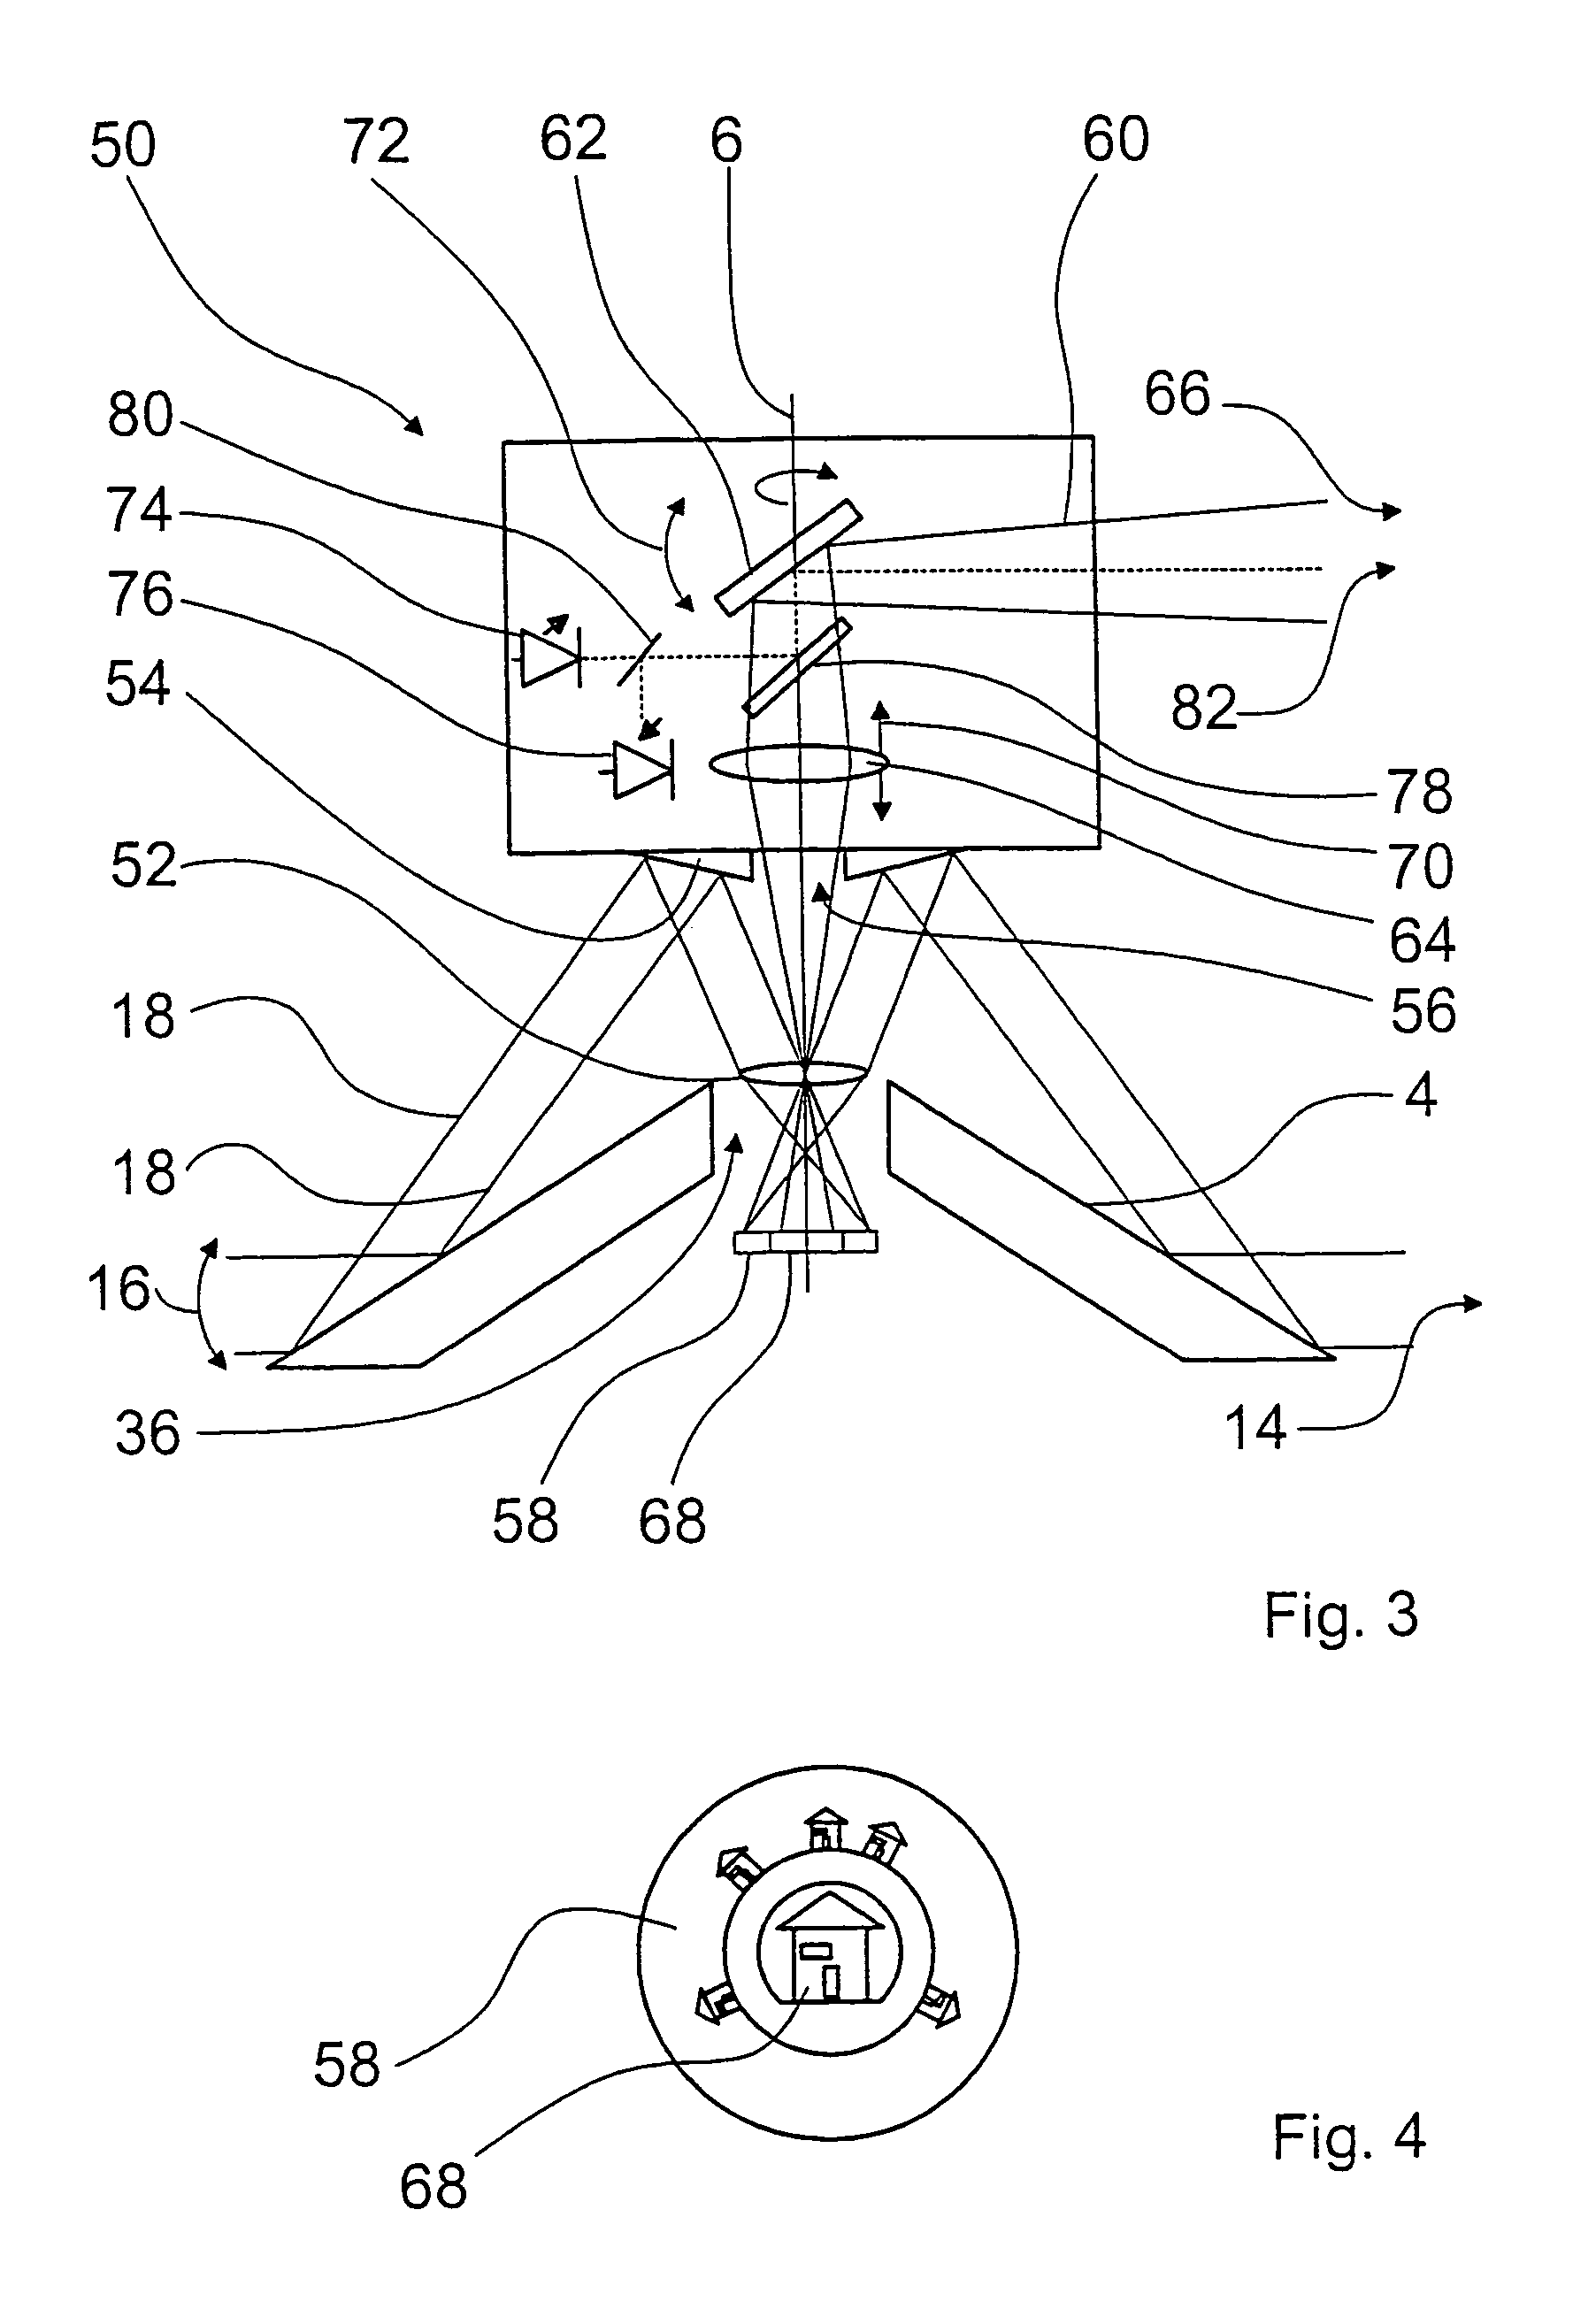 Camera system for monitoring a solid angle region and for detection of detailed information from the solid angle region